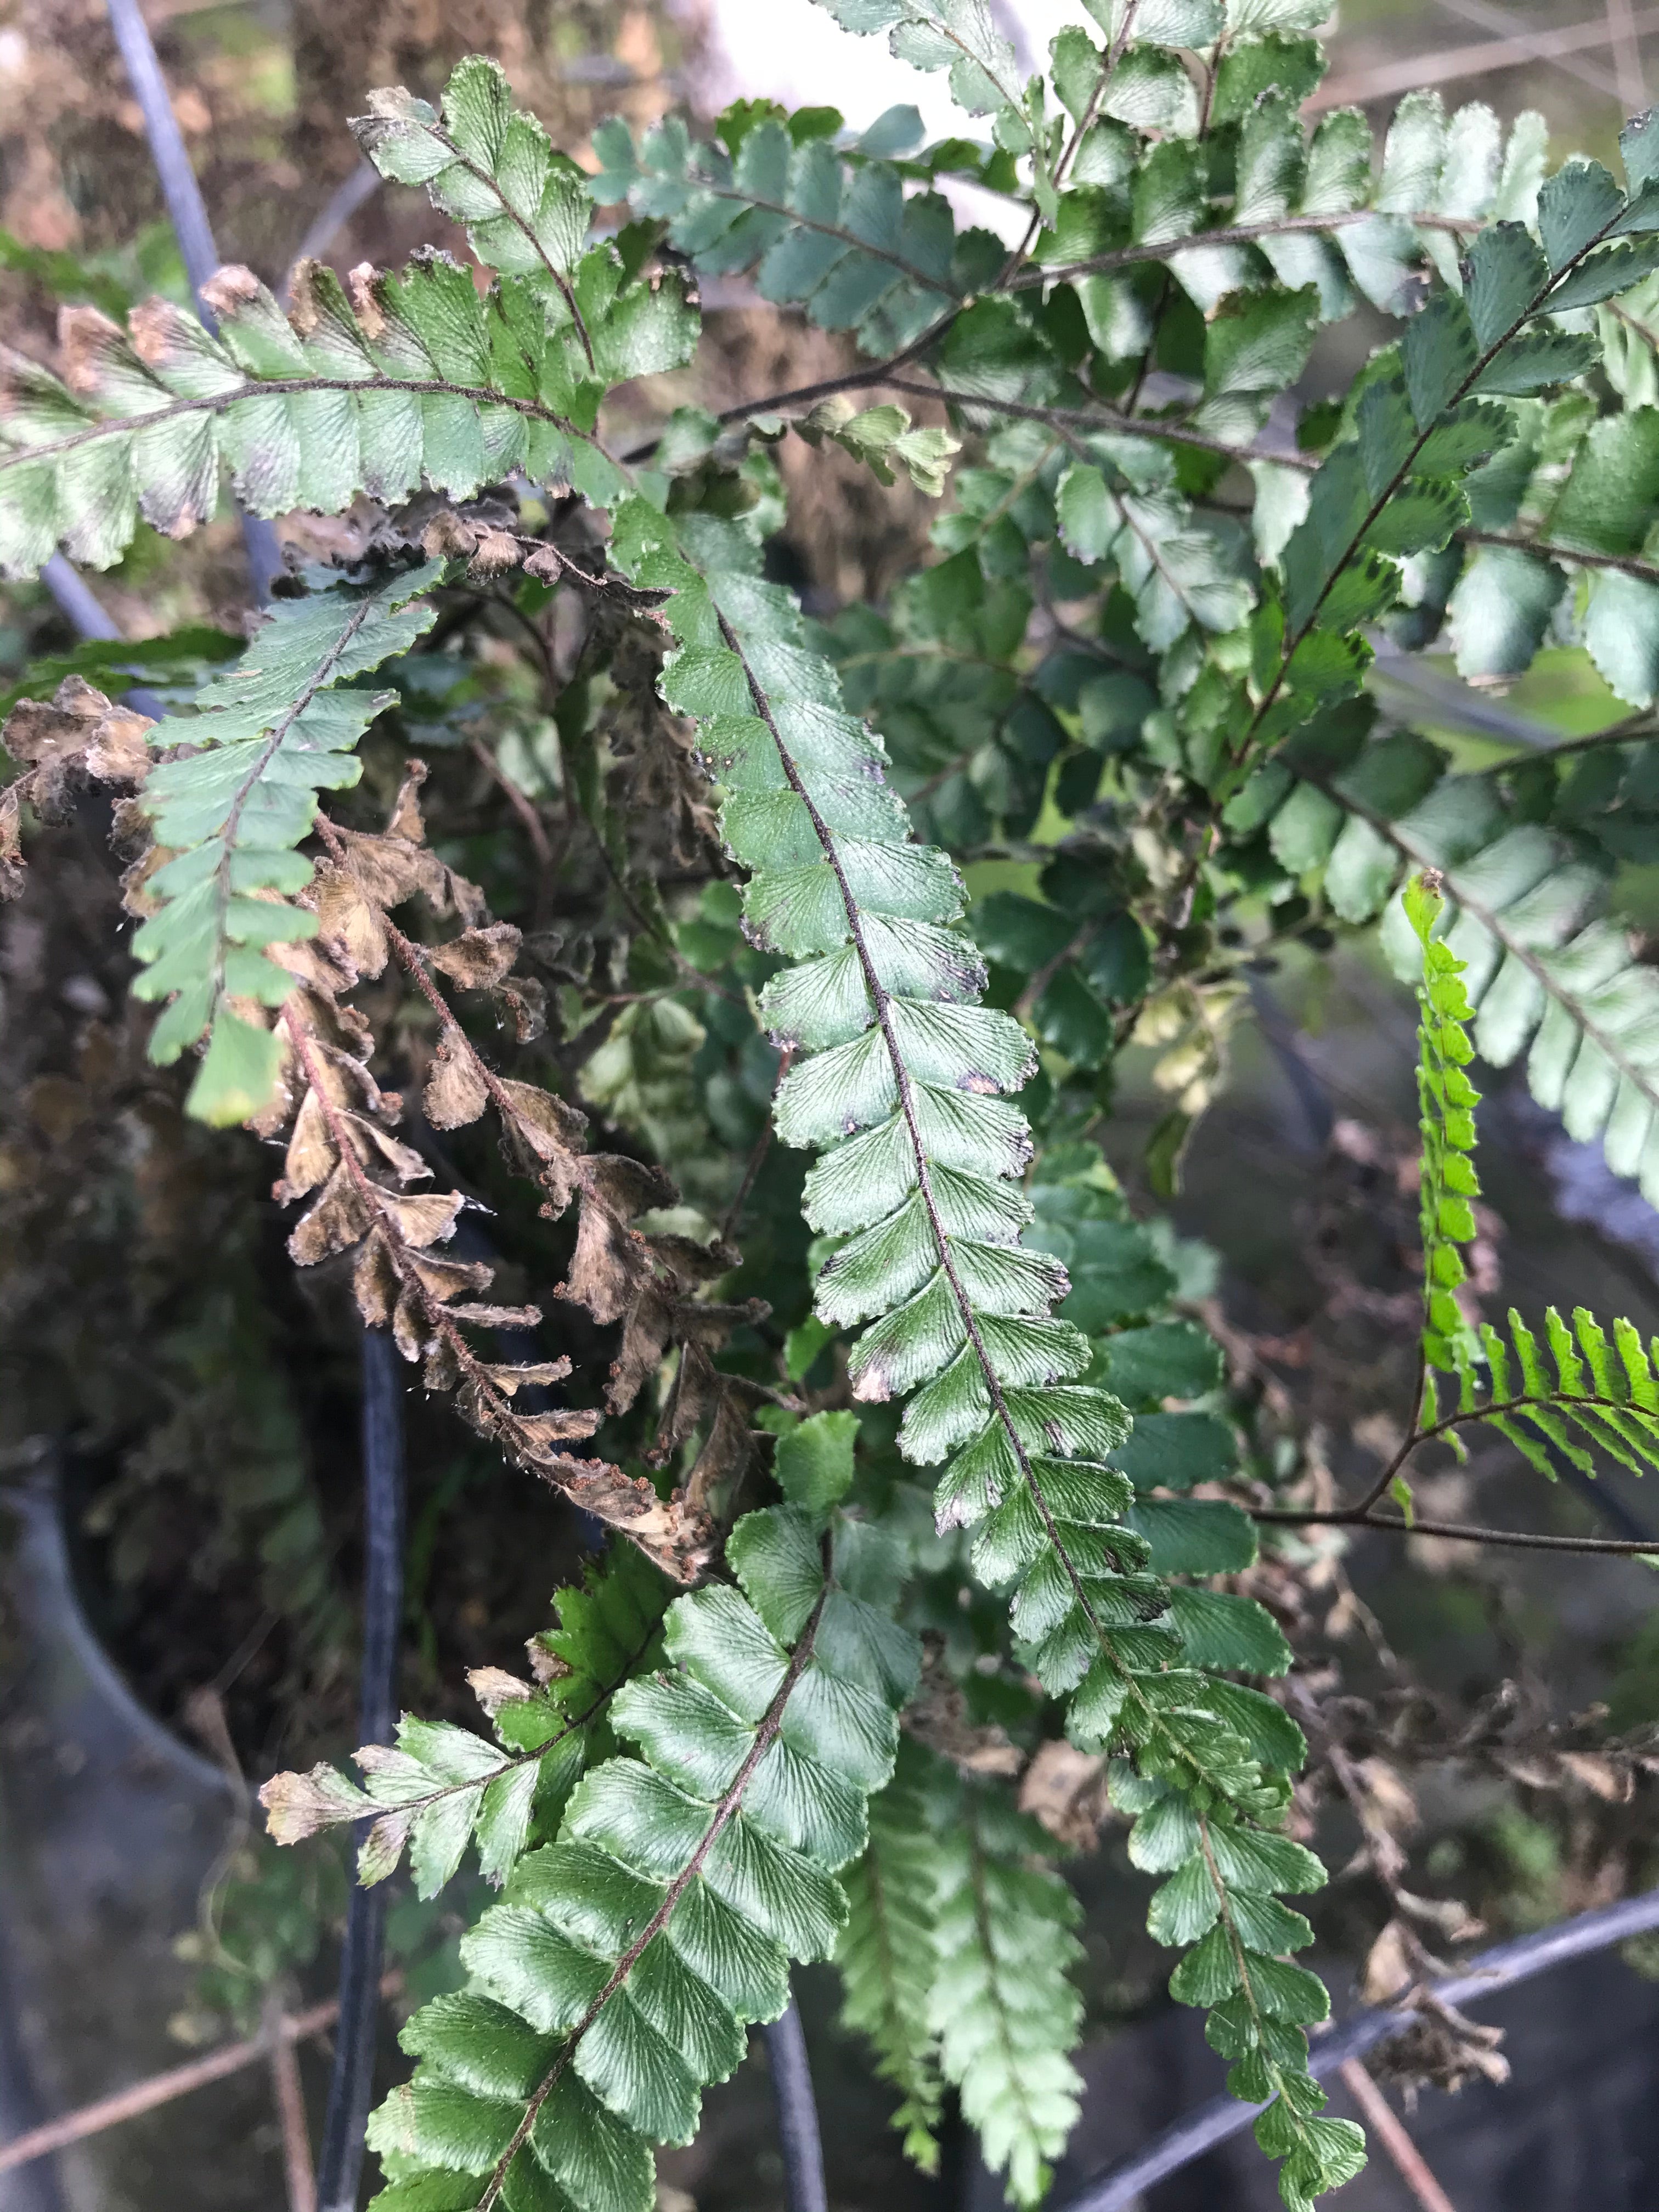 A fern with crispy, brown fronds.